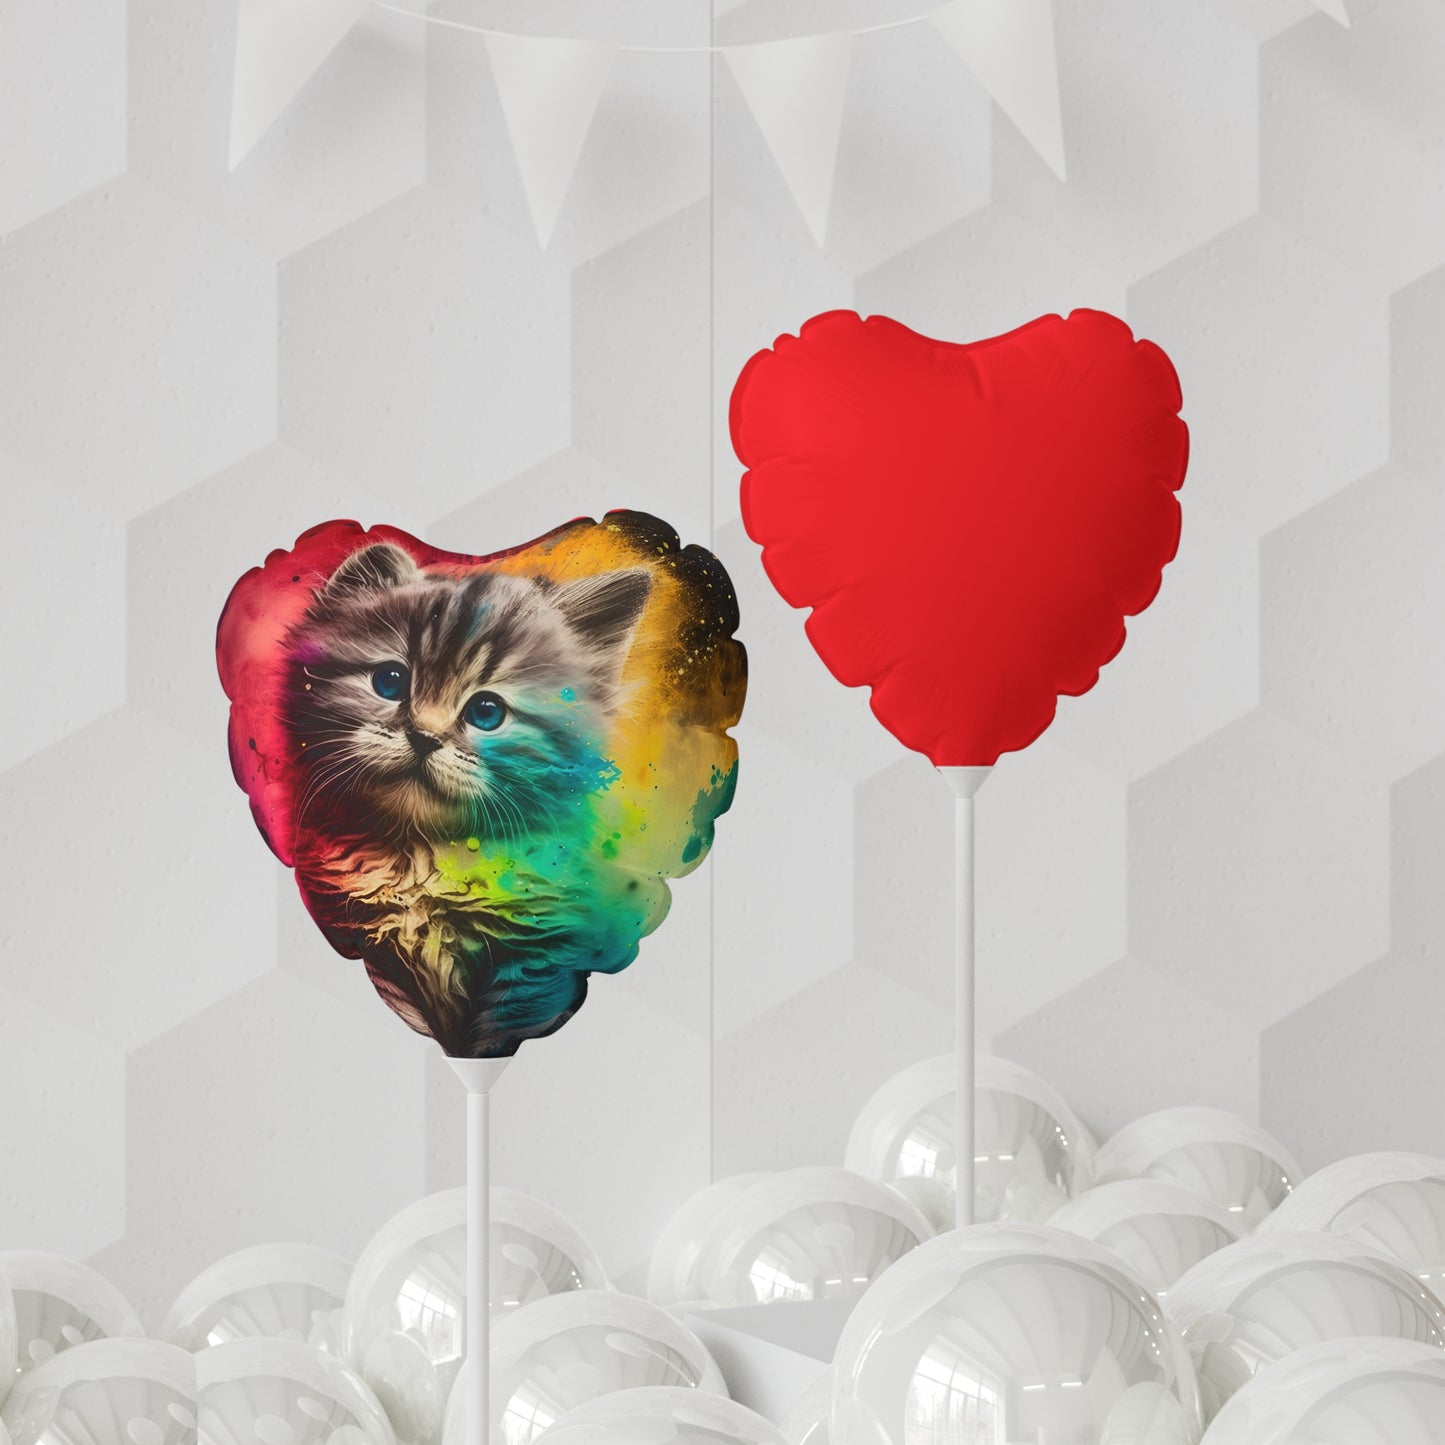 Pretty Kitty Style One Balloon (Round and Heart-shaped), 11"